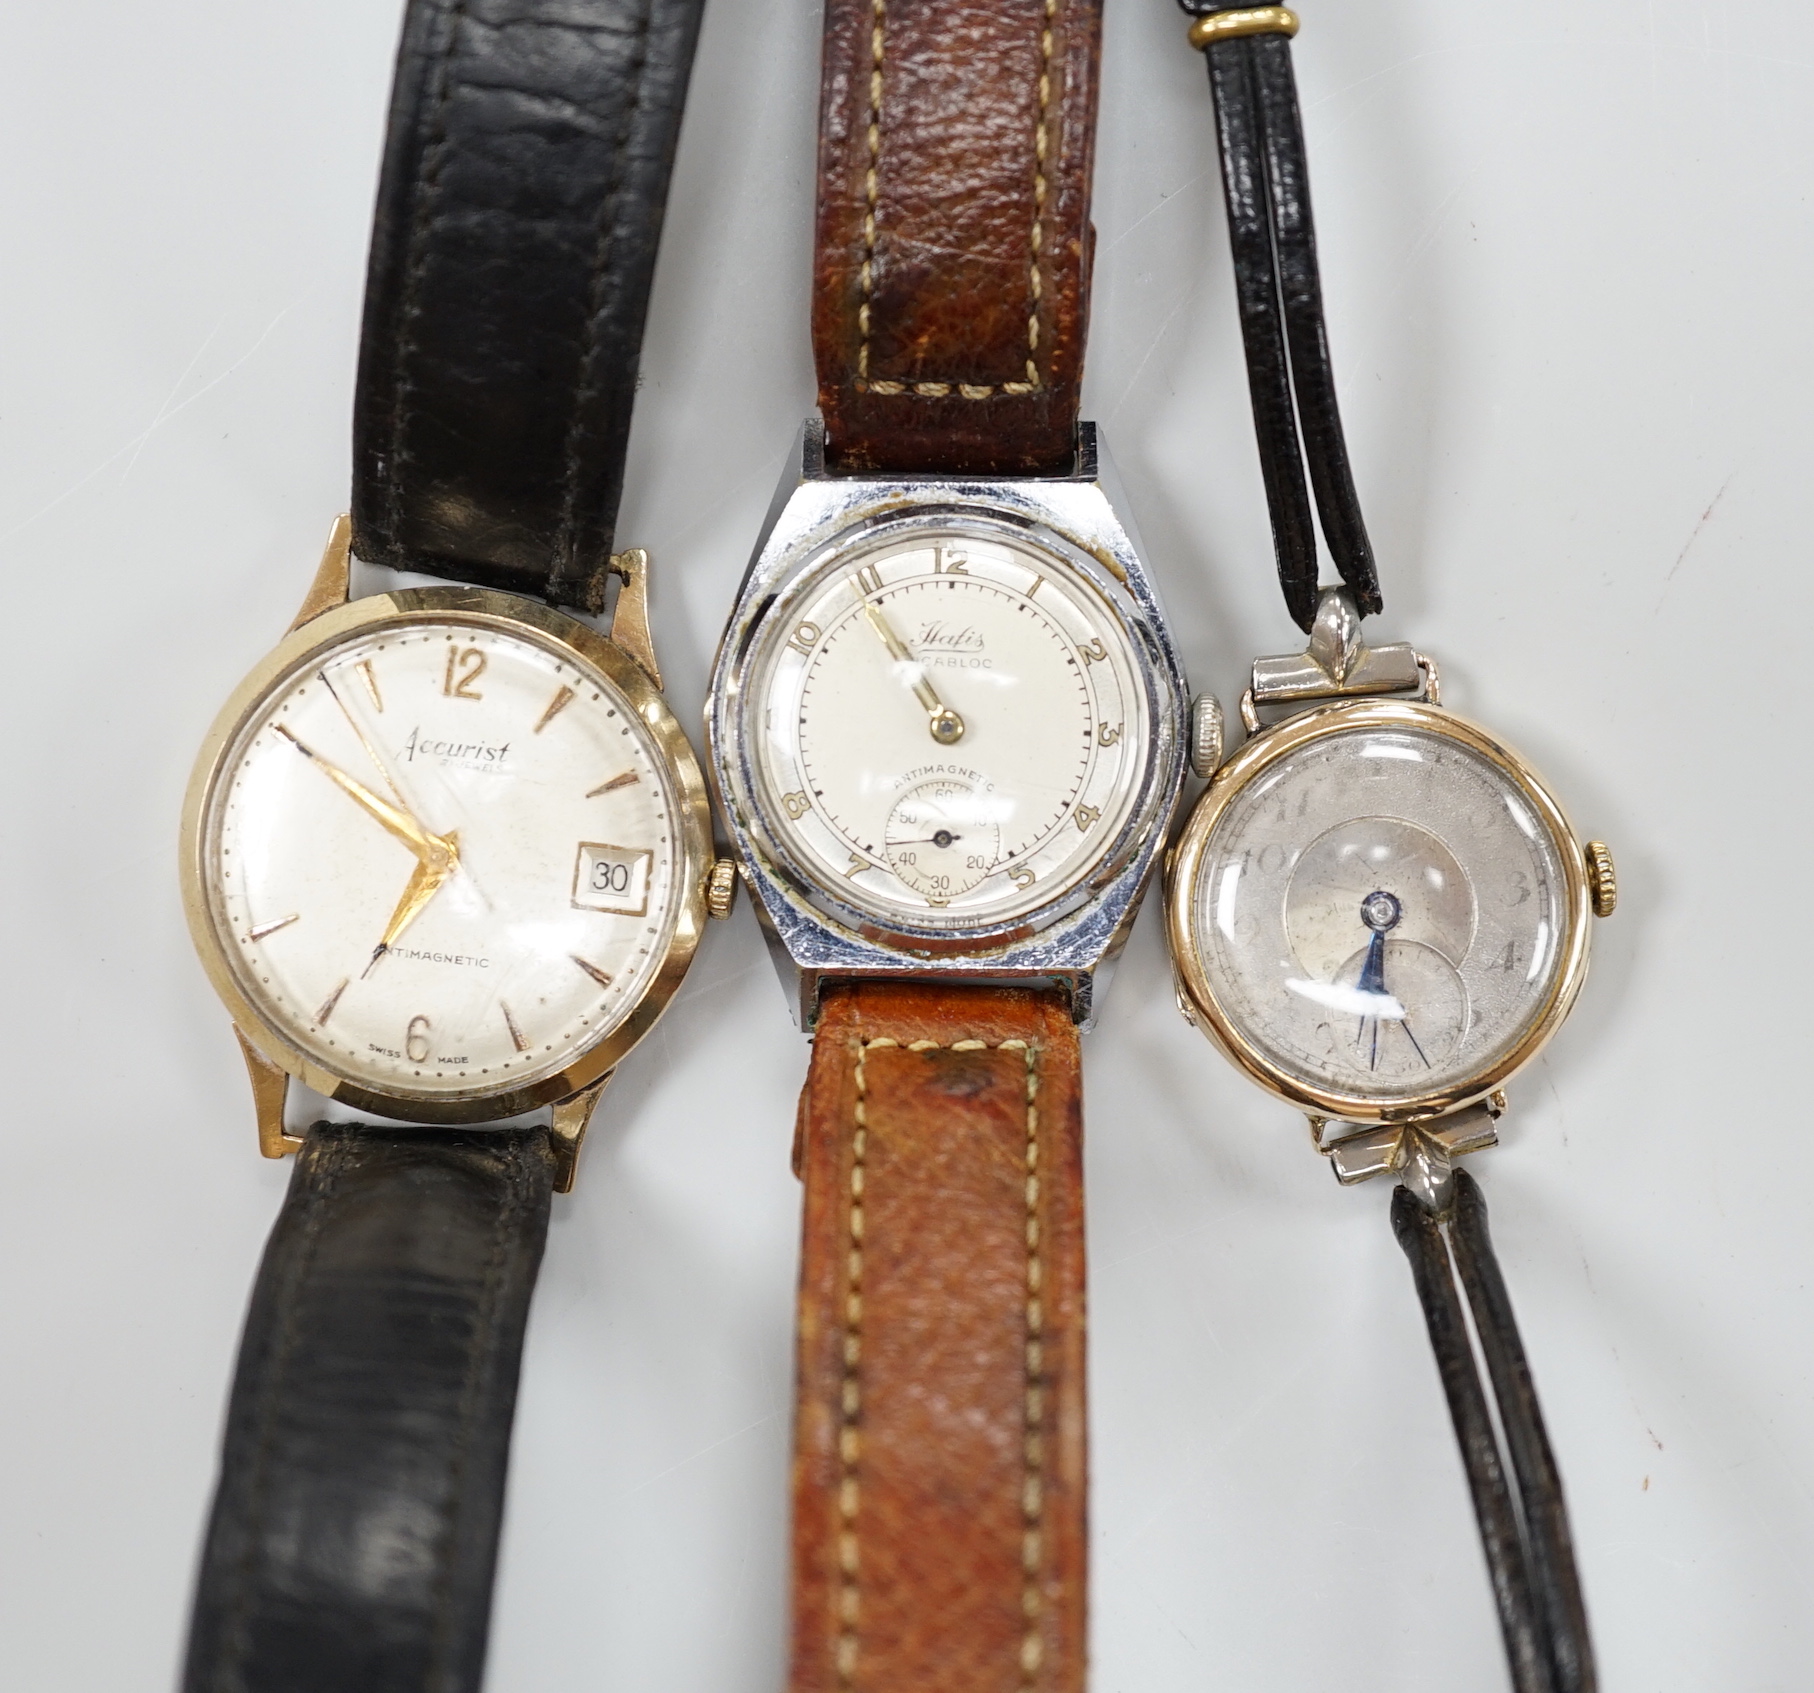 A lady's 9ct manual wind wrist watch, with Arabic dial and subsidiary seconds, a gentleman's yellow metal Accurist manual wind wrist watch and a steel Hatis watch.